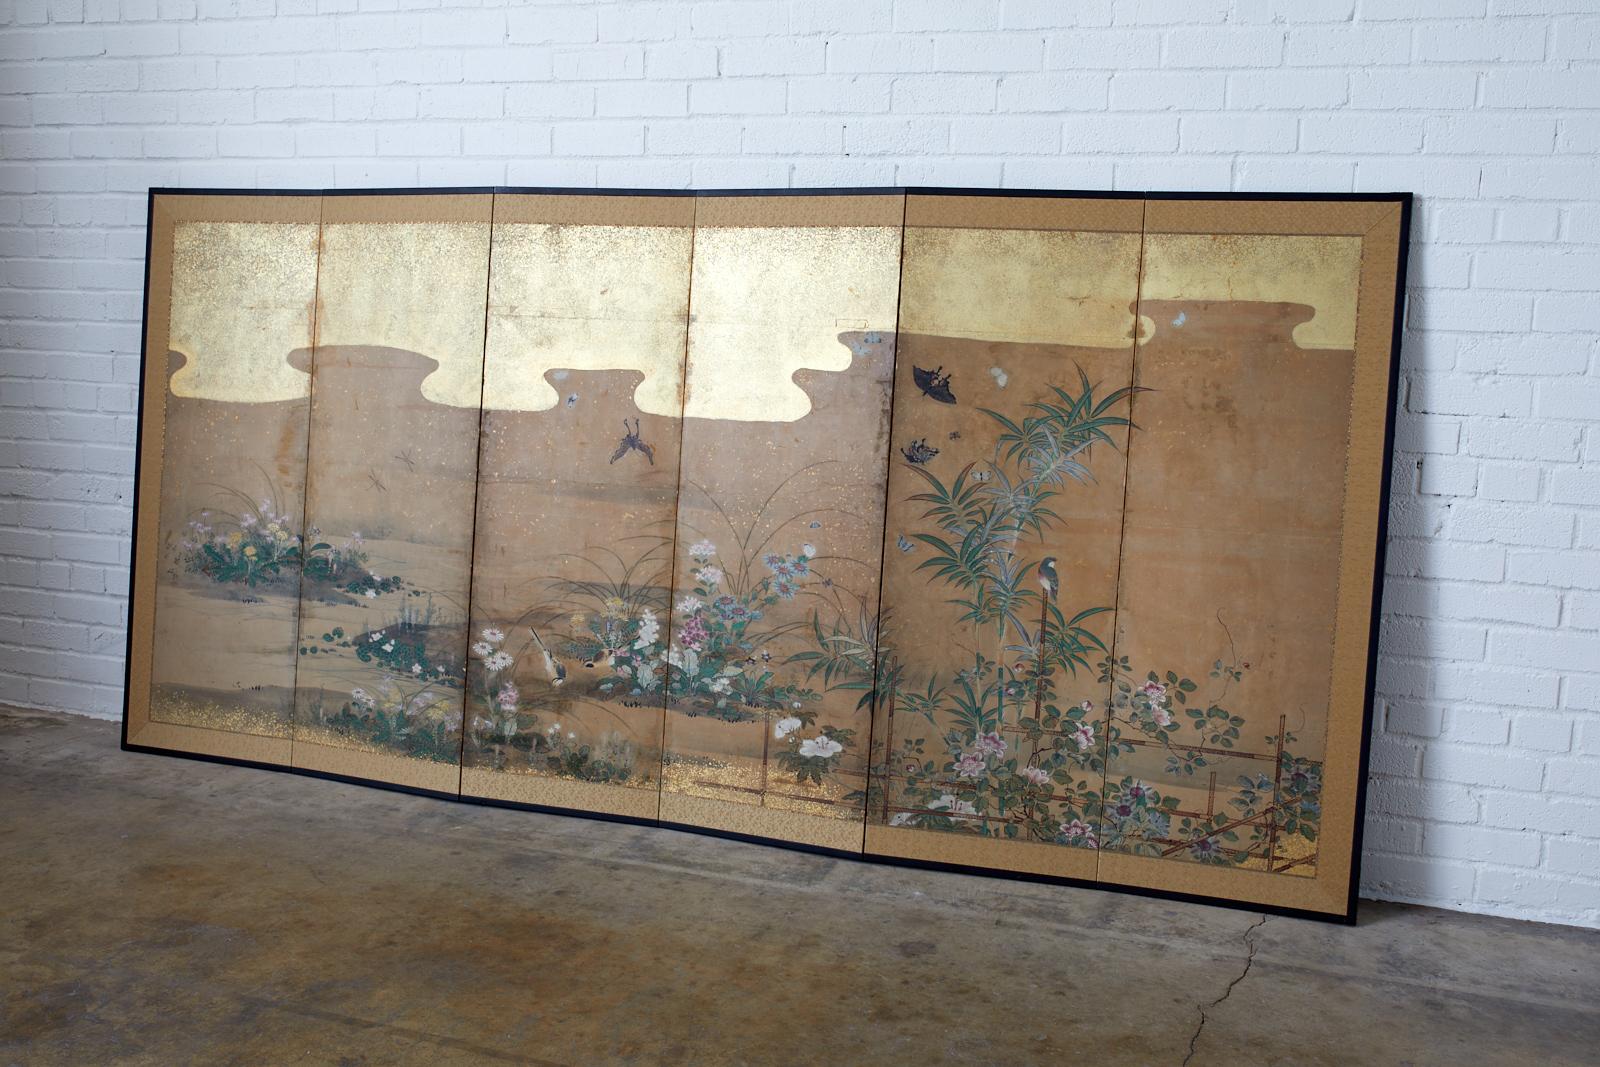 18th century Japanese six panel Edo period screen depicting flora and fauna landscape. Beautifully painted flowers with birds, insects, and butterflies at a water's edge. Ink and color pigments painted in the Kano school style with later added gold